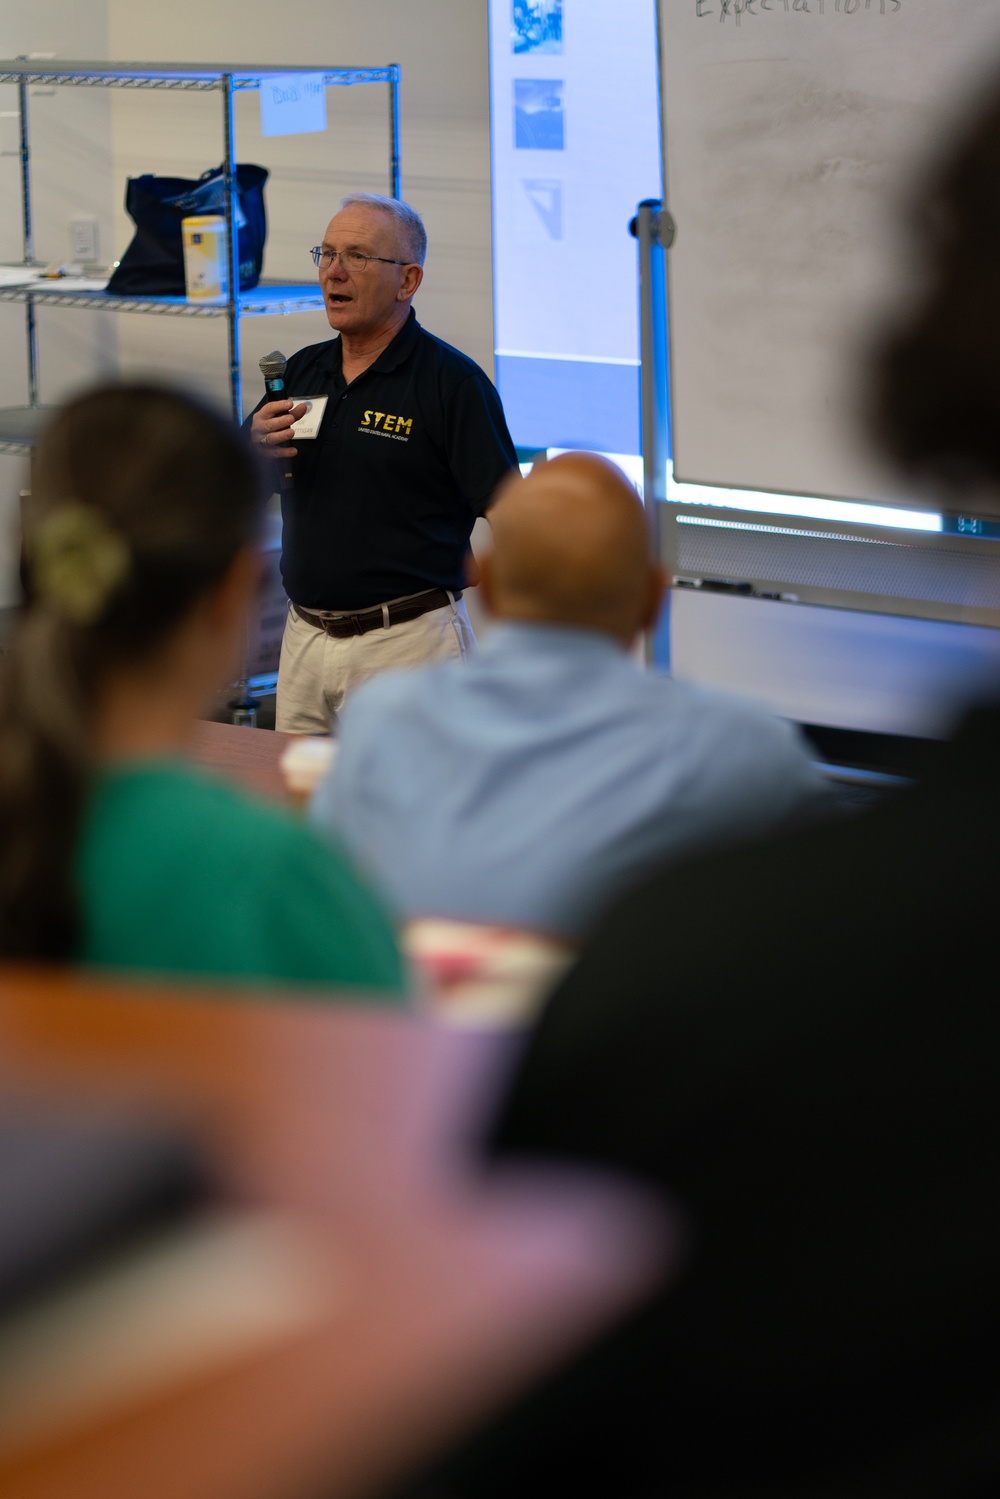 Investing in Future Generations: SSP Receives Hands-On STEM Outreach Training at the US Naval Academy